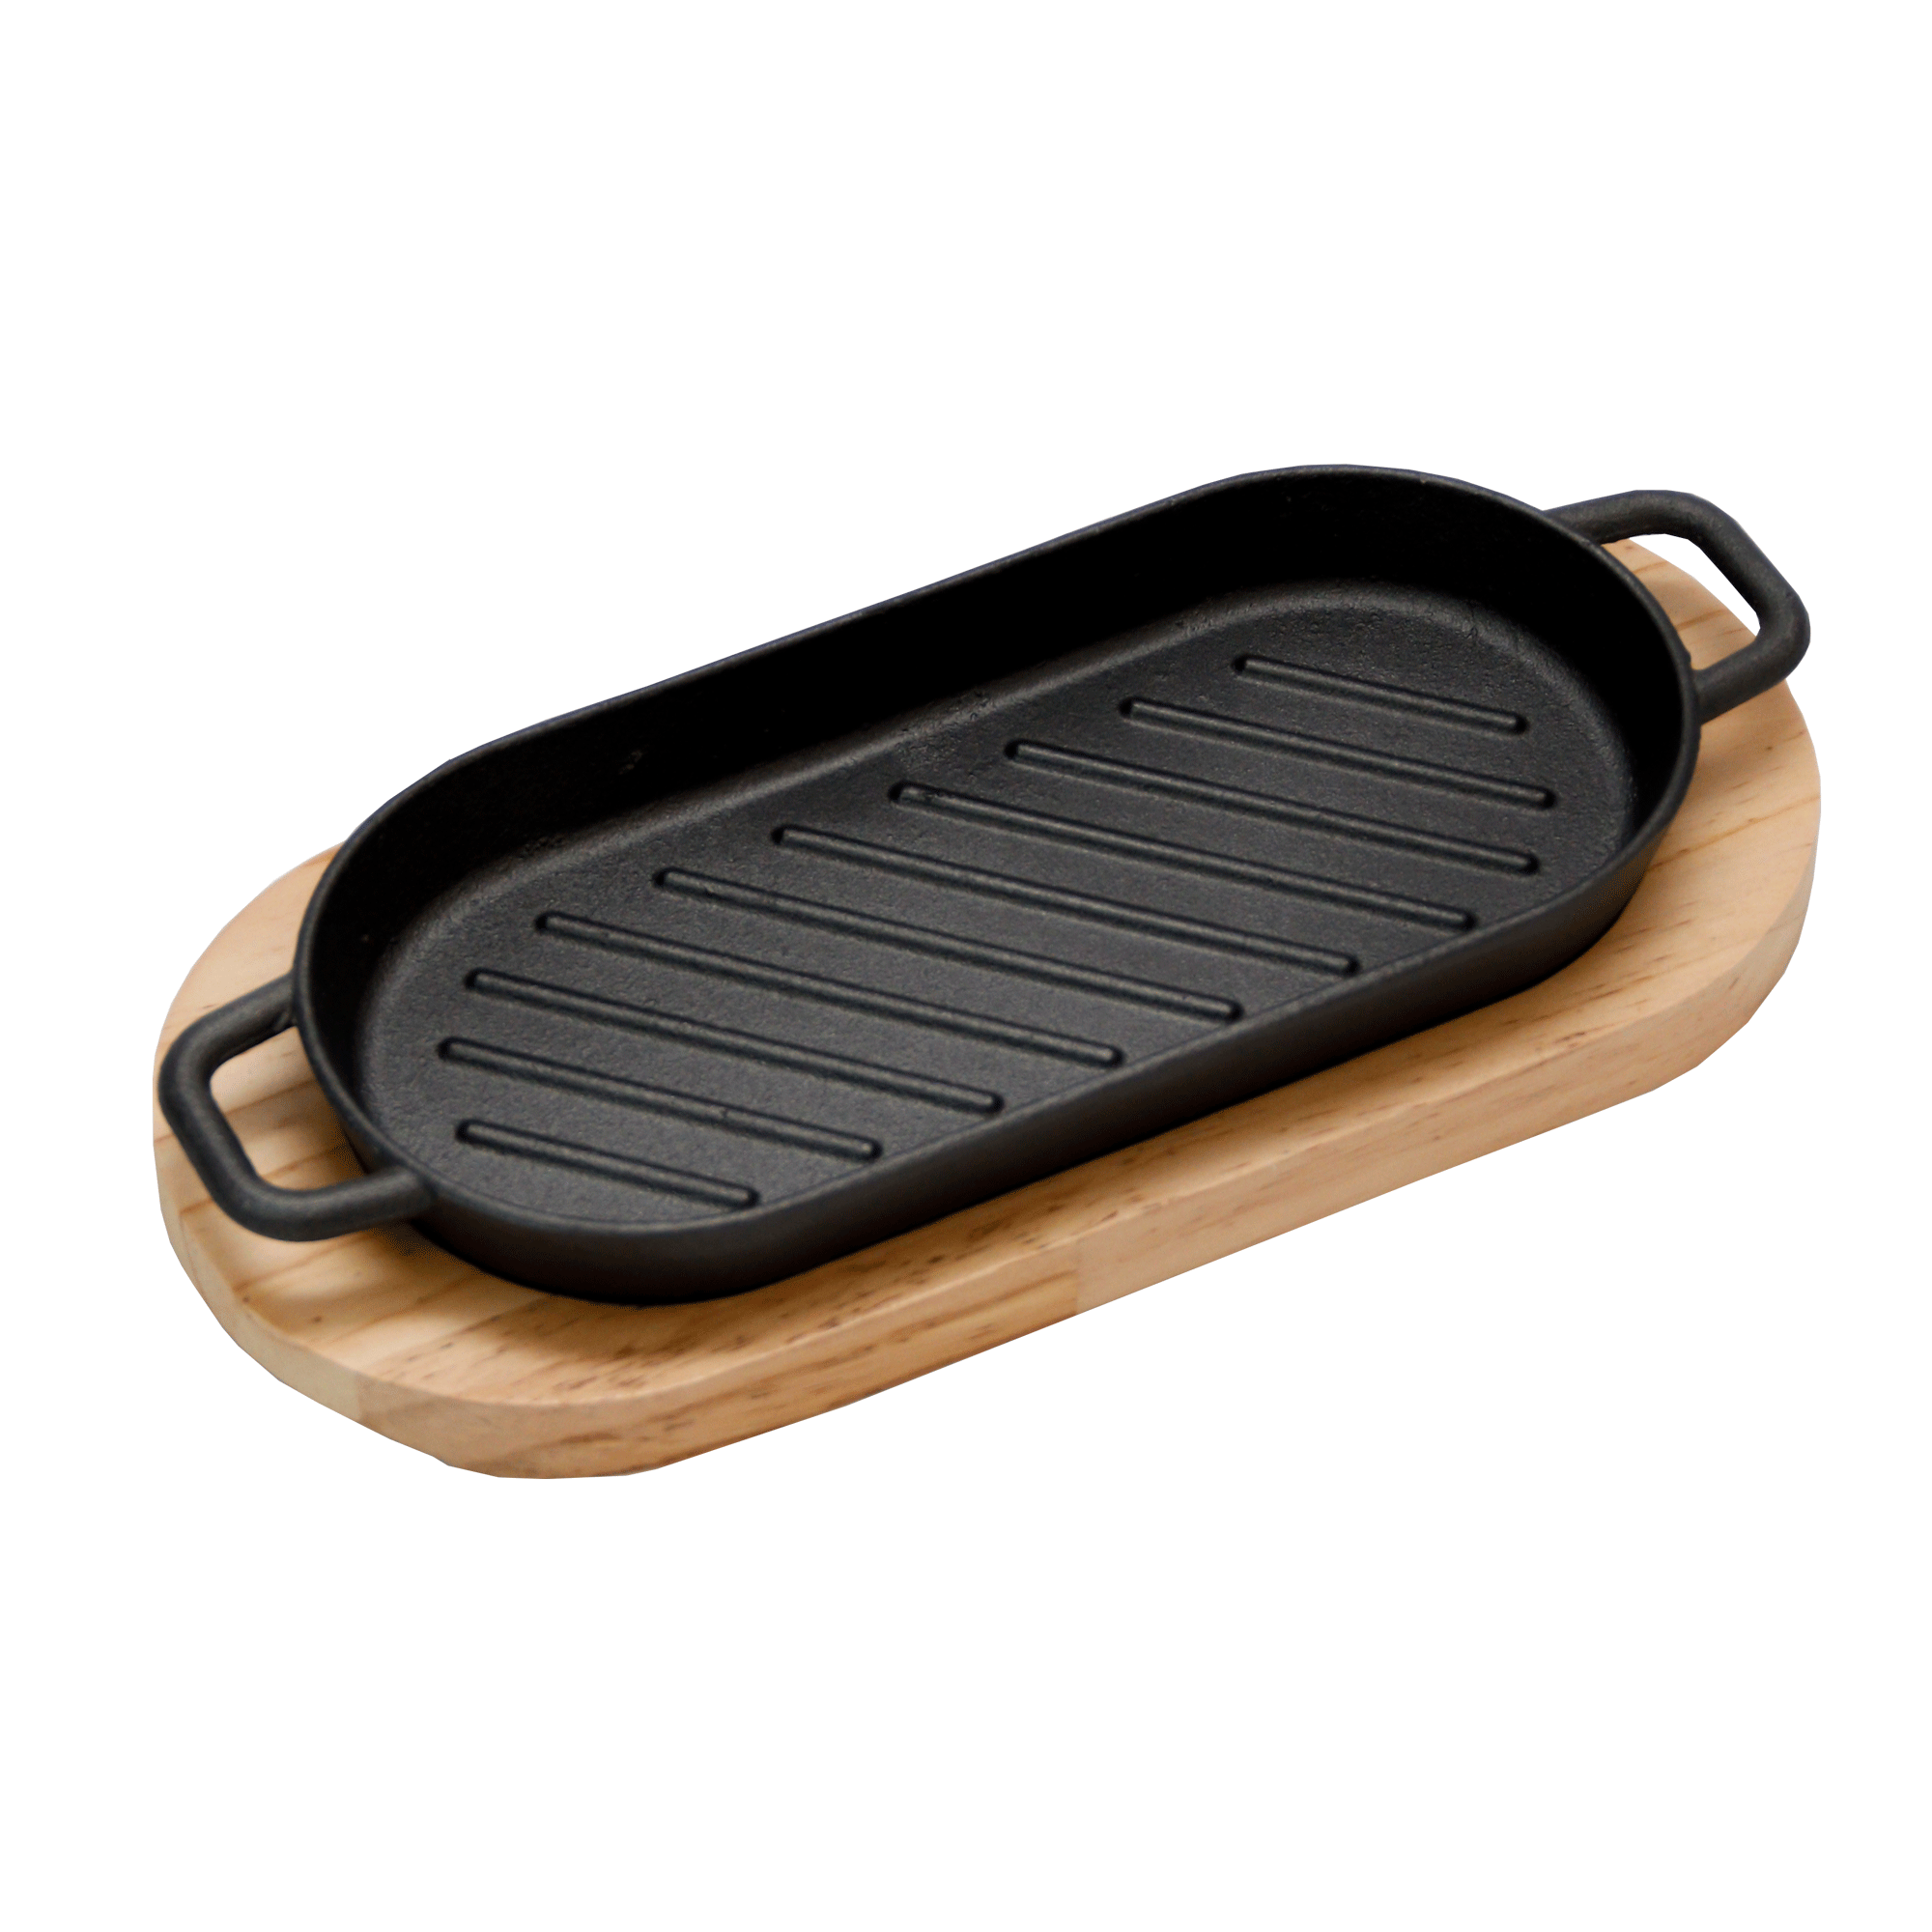  Frying pan with cast iron pan 44-22 oval